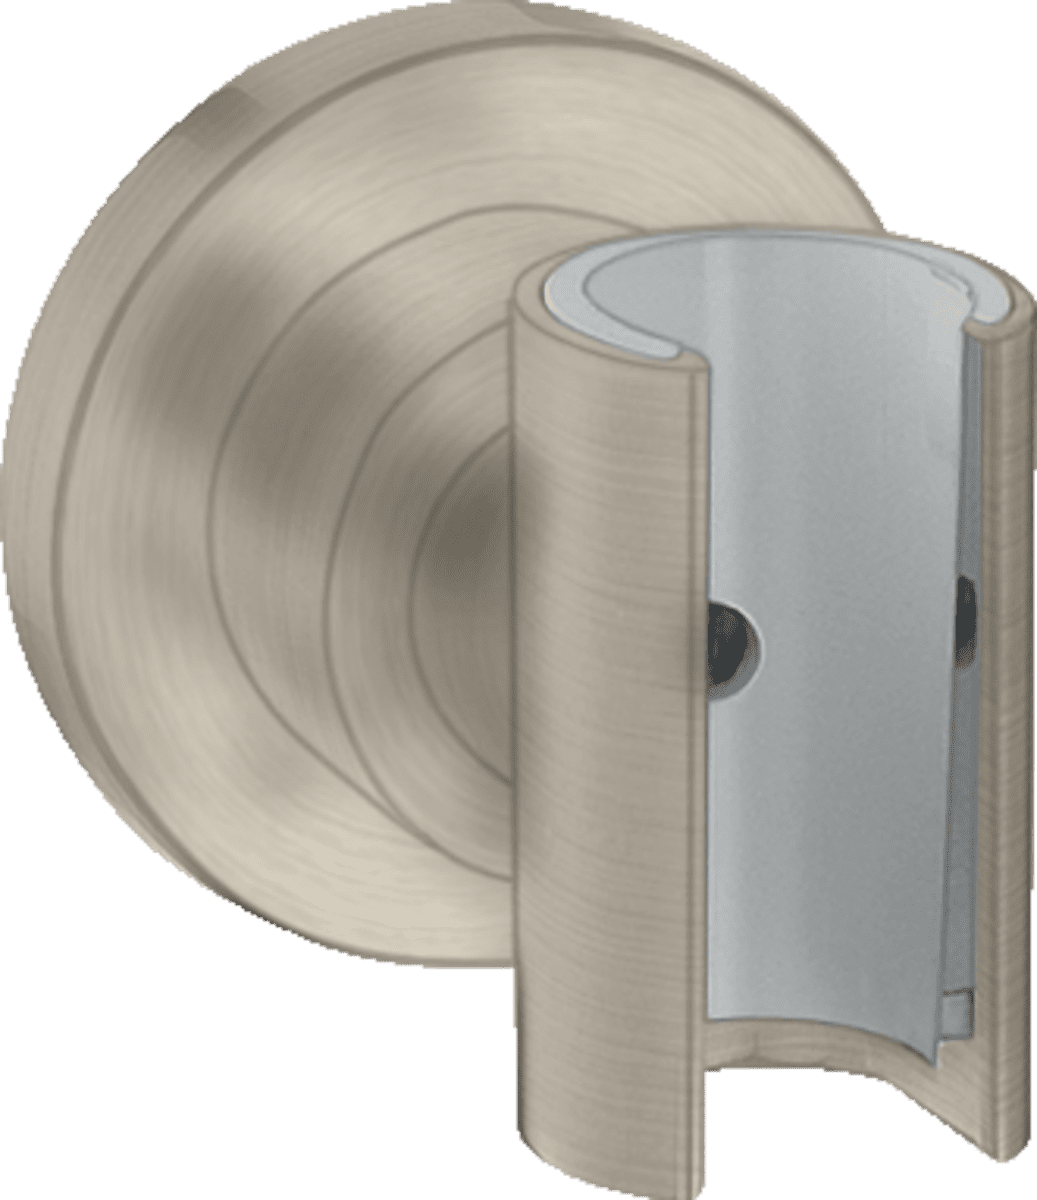 Picture of HANSGROHE AXOR Citterio Shower holder round #39525820 - Brushed Nickel